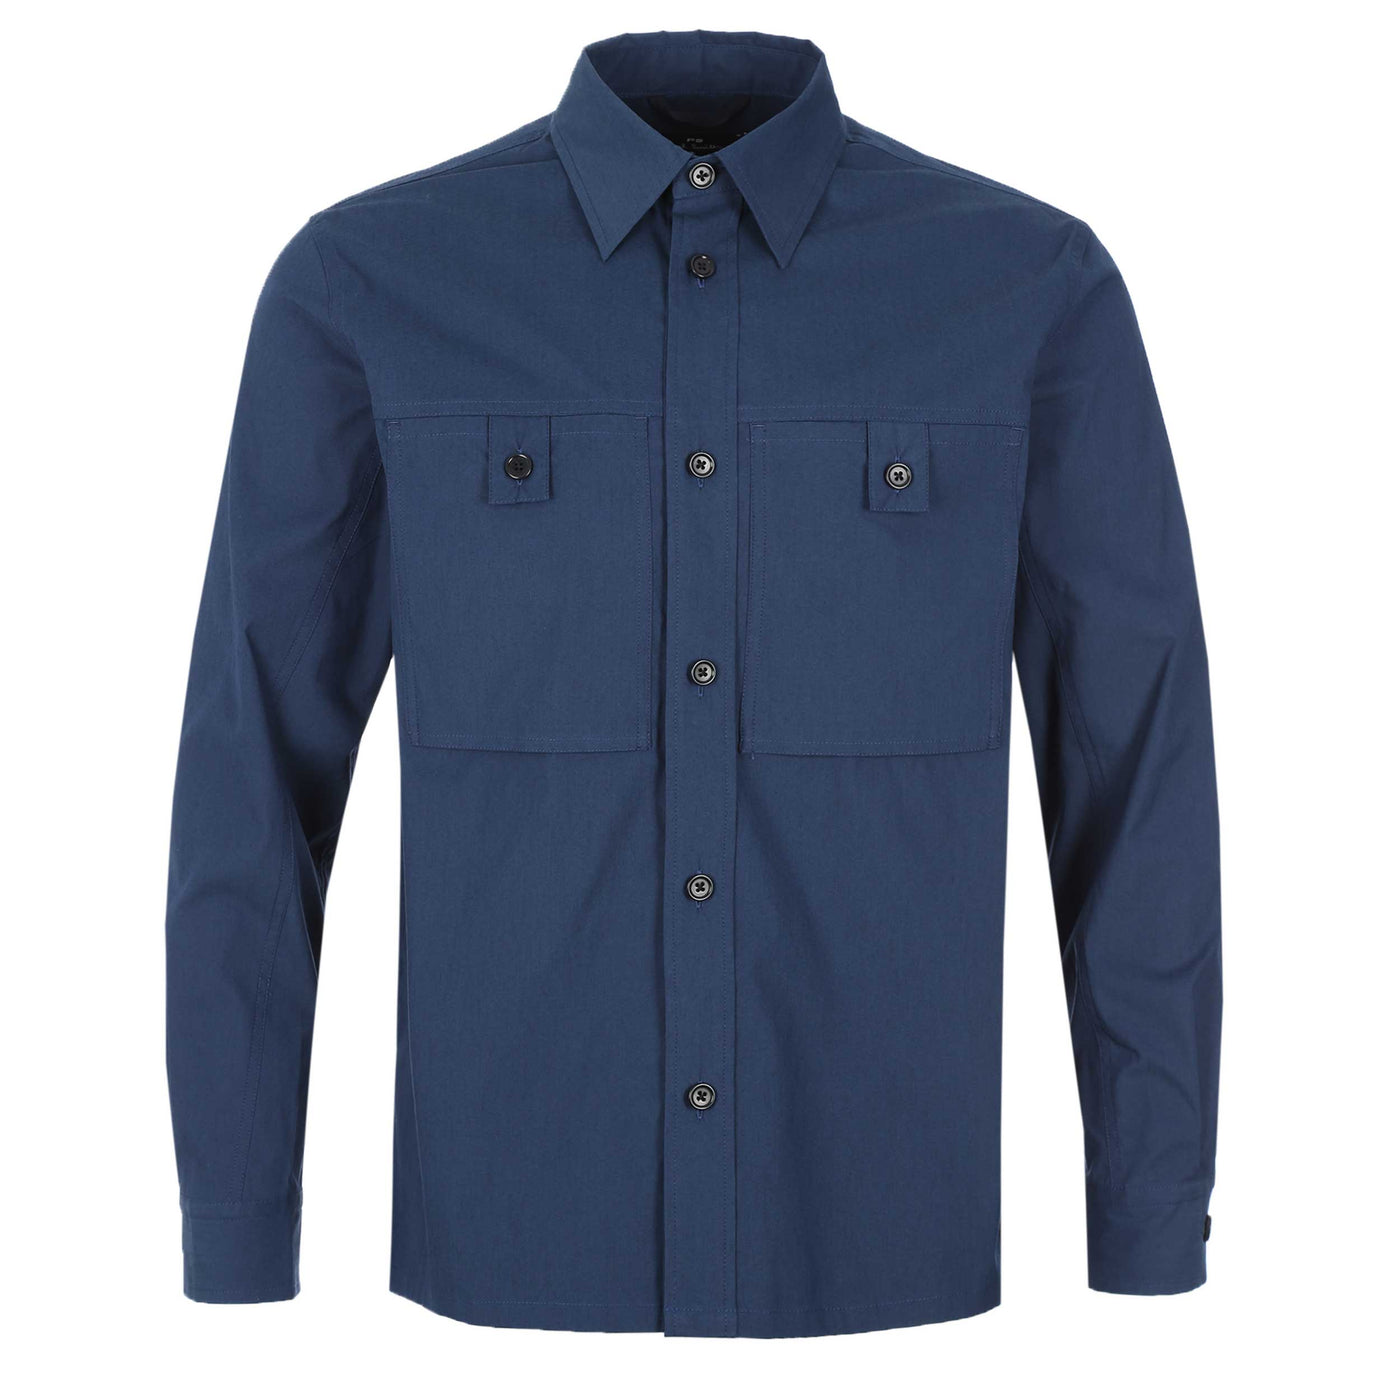 Paul Smith Patch Pocket Shirt Jacket in Navy